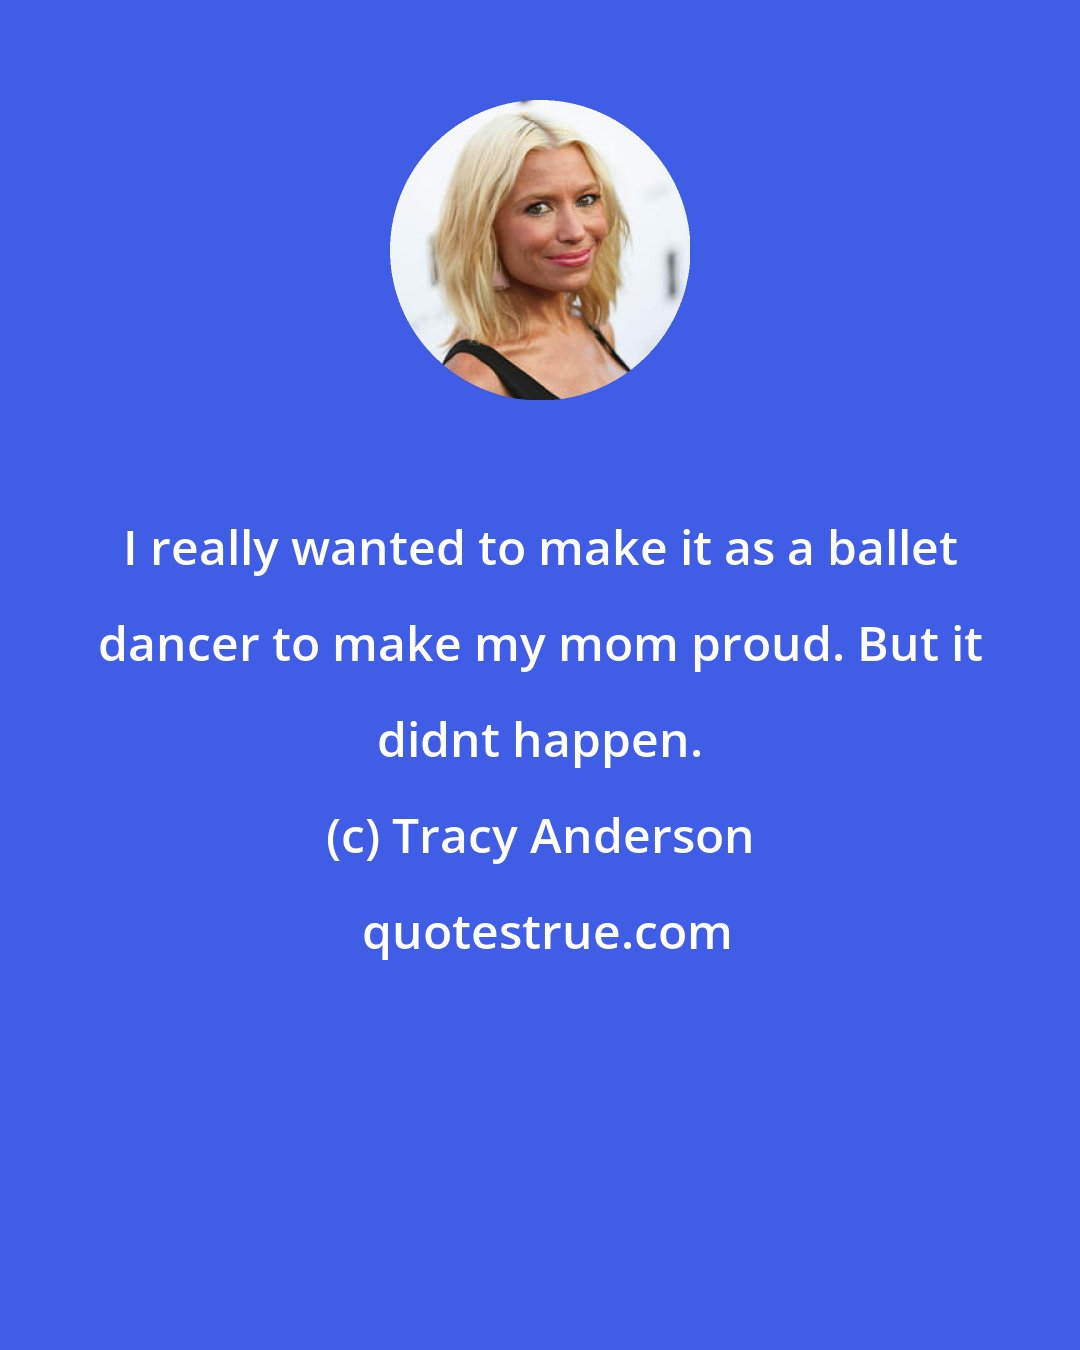 Tracy Anderson: I really wanted to make it as a ballet dancer to make my mom proud. But it didnt happen.